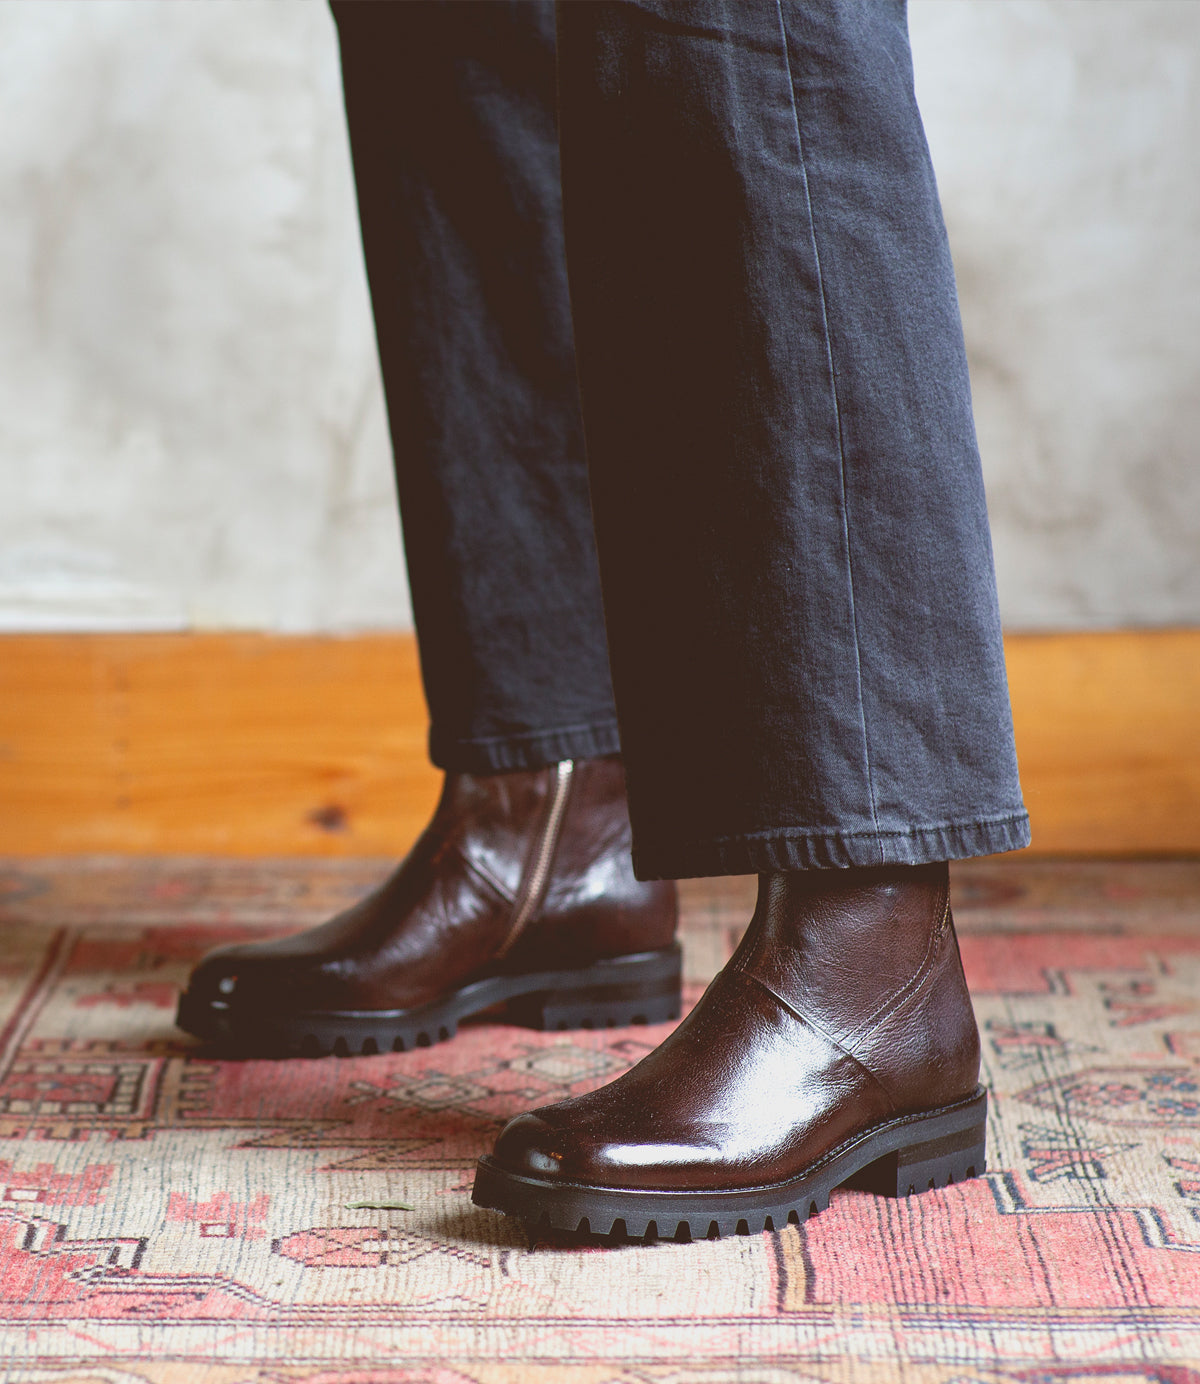 A person standing on a Ploy rug wearing Bed Stu Italian leather boots.